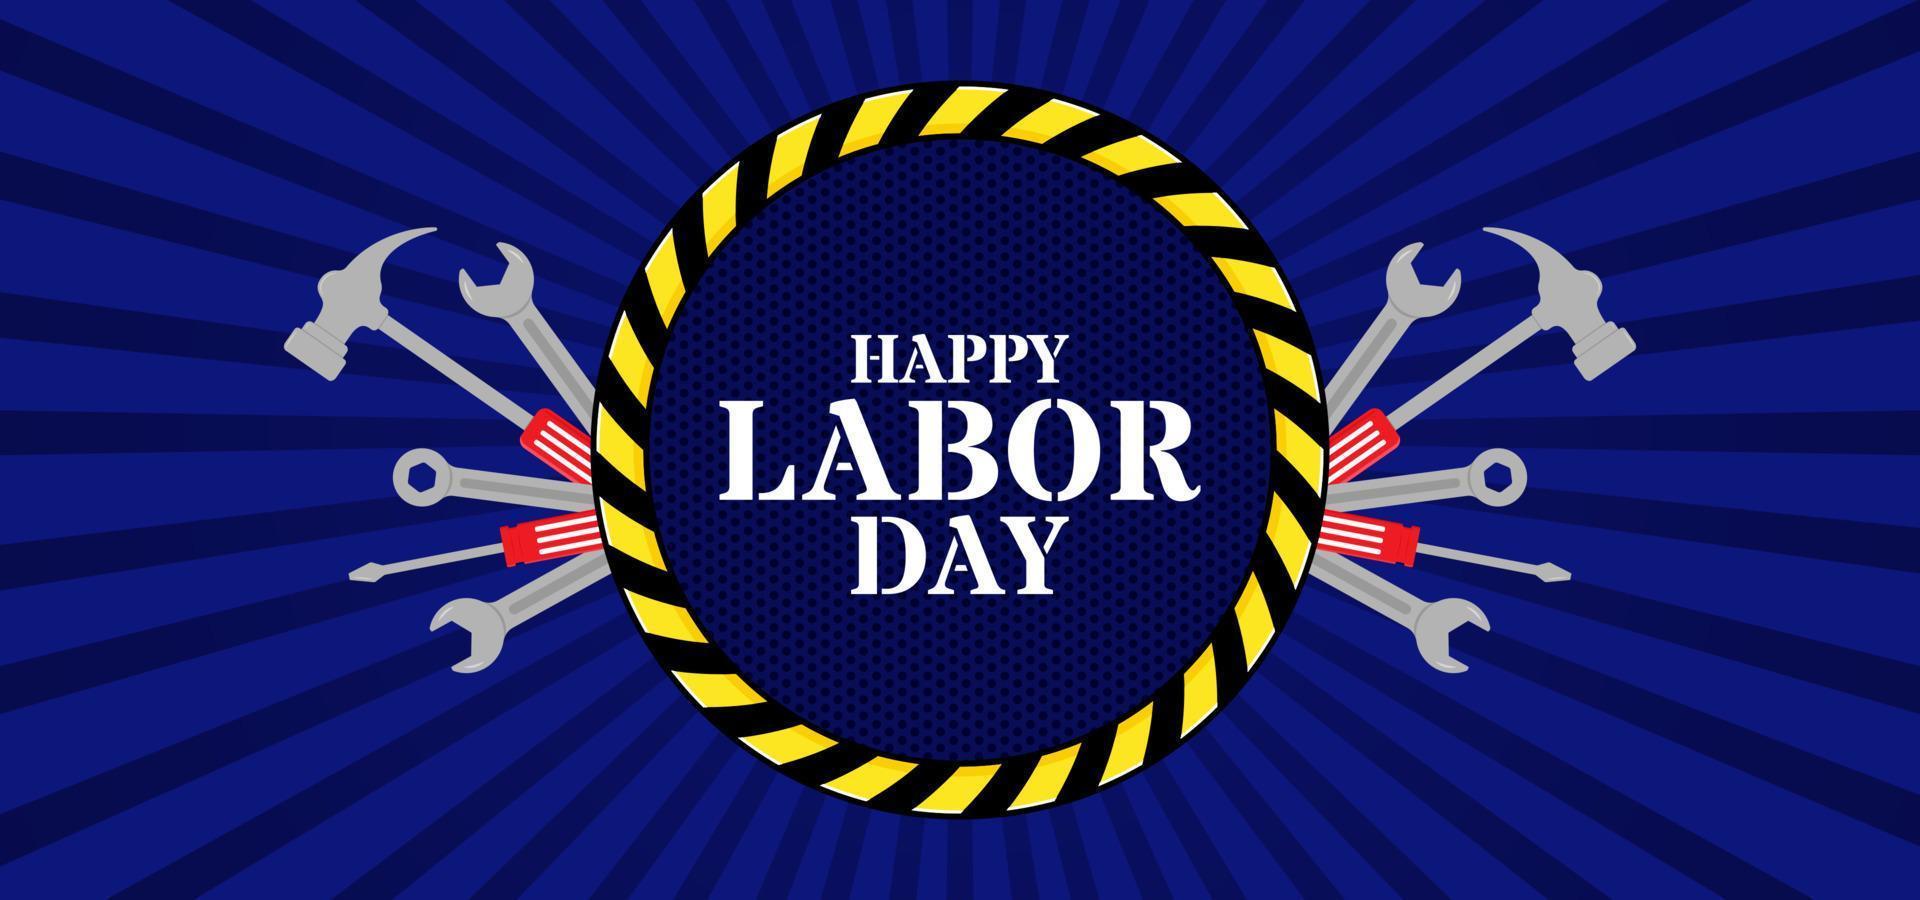 Happy Labor Day template background. Blue background with carpentry tool symbols. Vector illustration